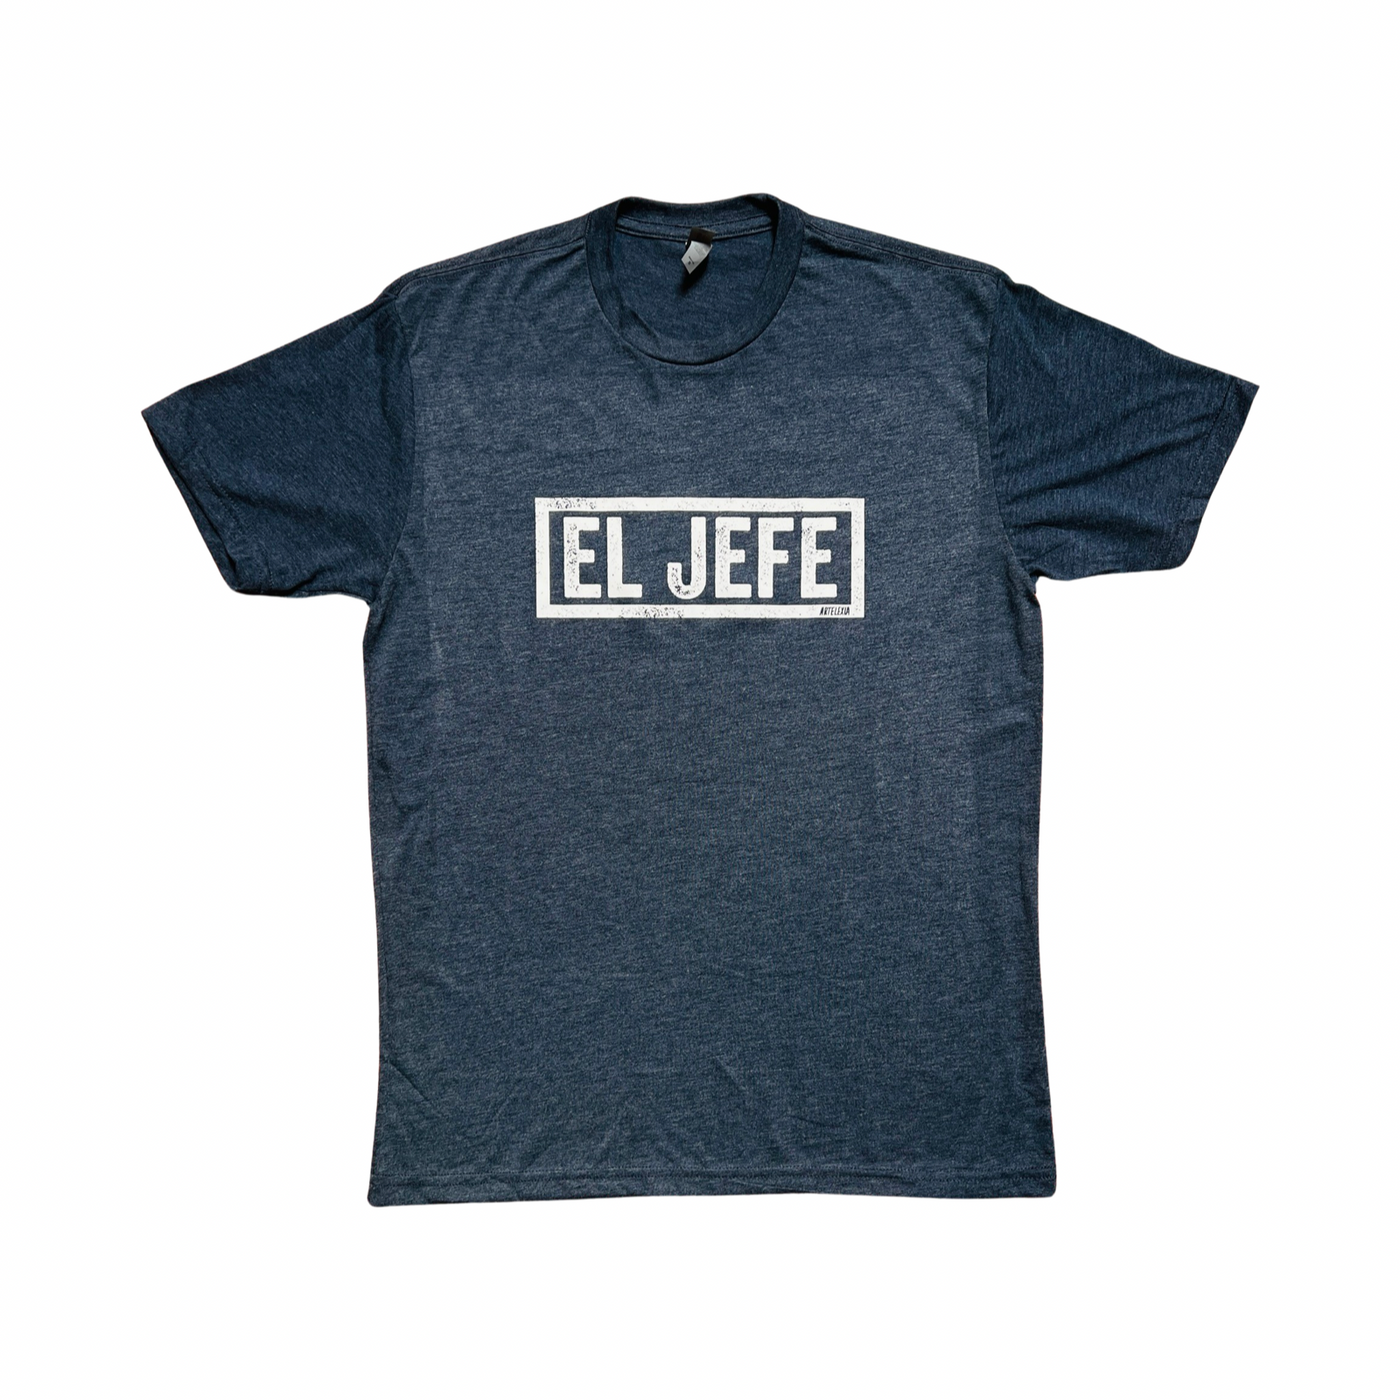 heathered navy blue shirt with the phrase El Jefe in white lettering.